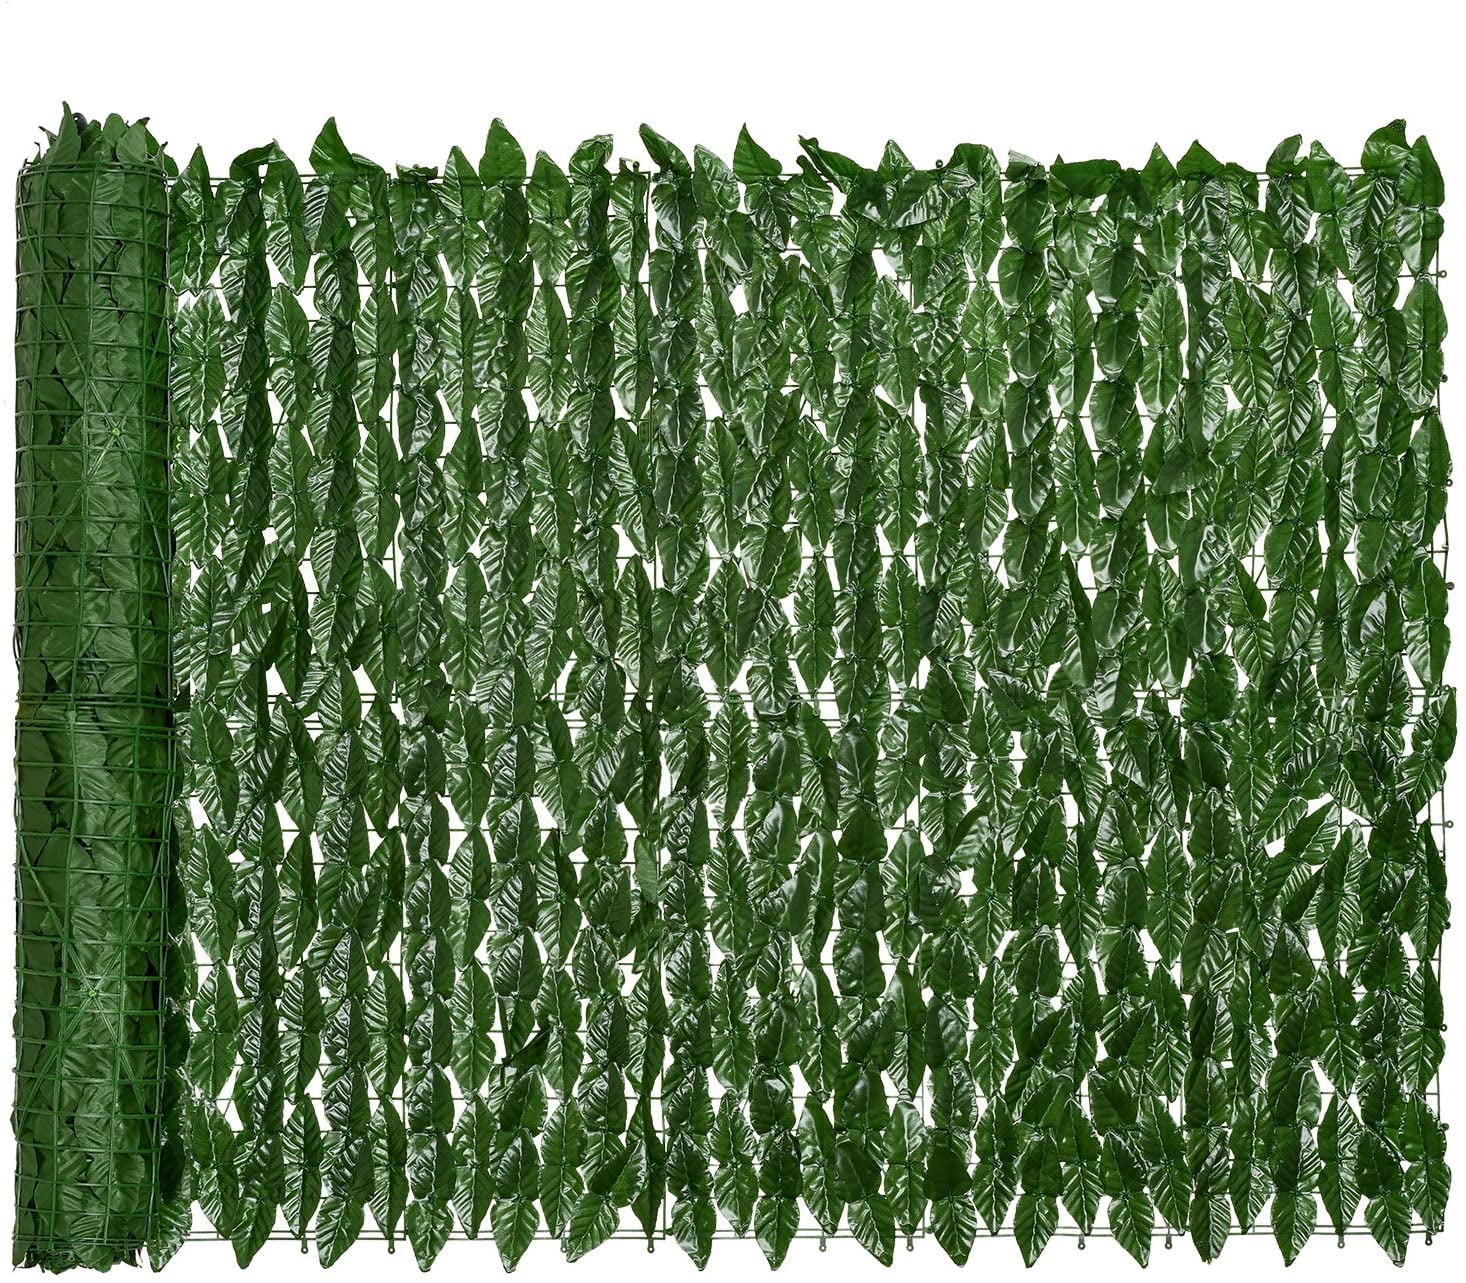 118x39'' Artificial Faux Ivy Leaf Privacy Fence Screen Hedge Decor Panel Garden